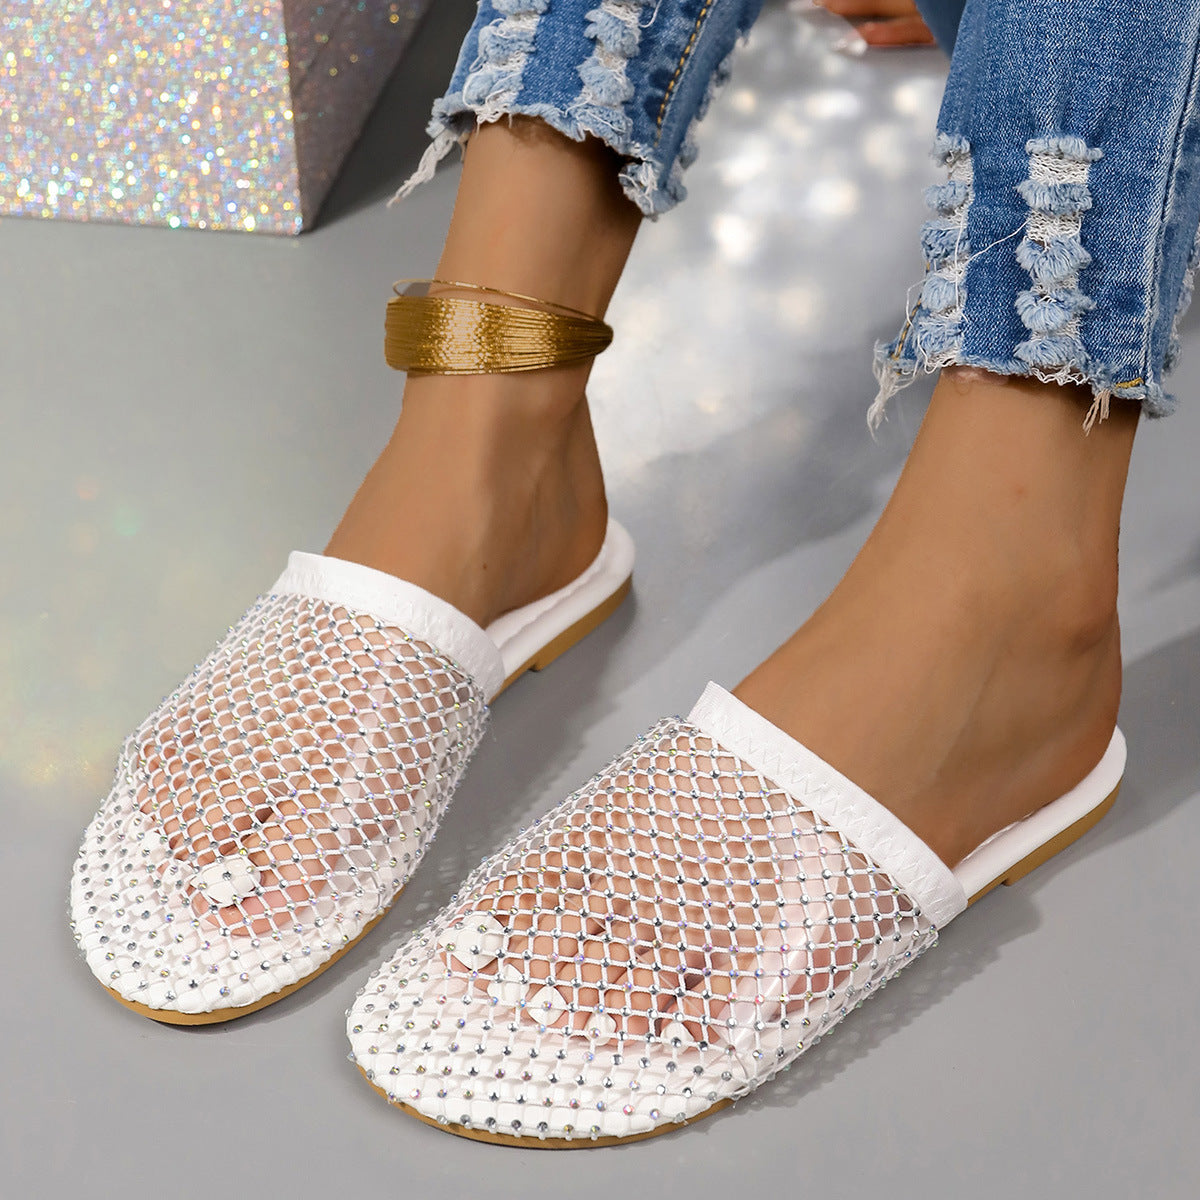 Hollow-toe Transparent Hollow Sandals With Rhinestones Summer Fashion Outdoor Slippers Flat Shoes For Women